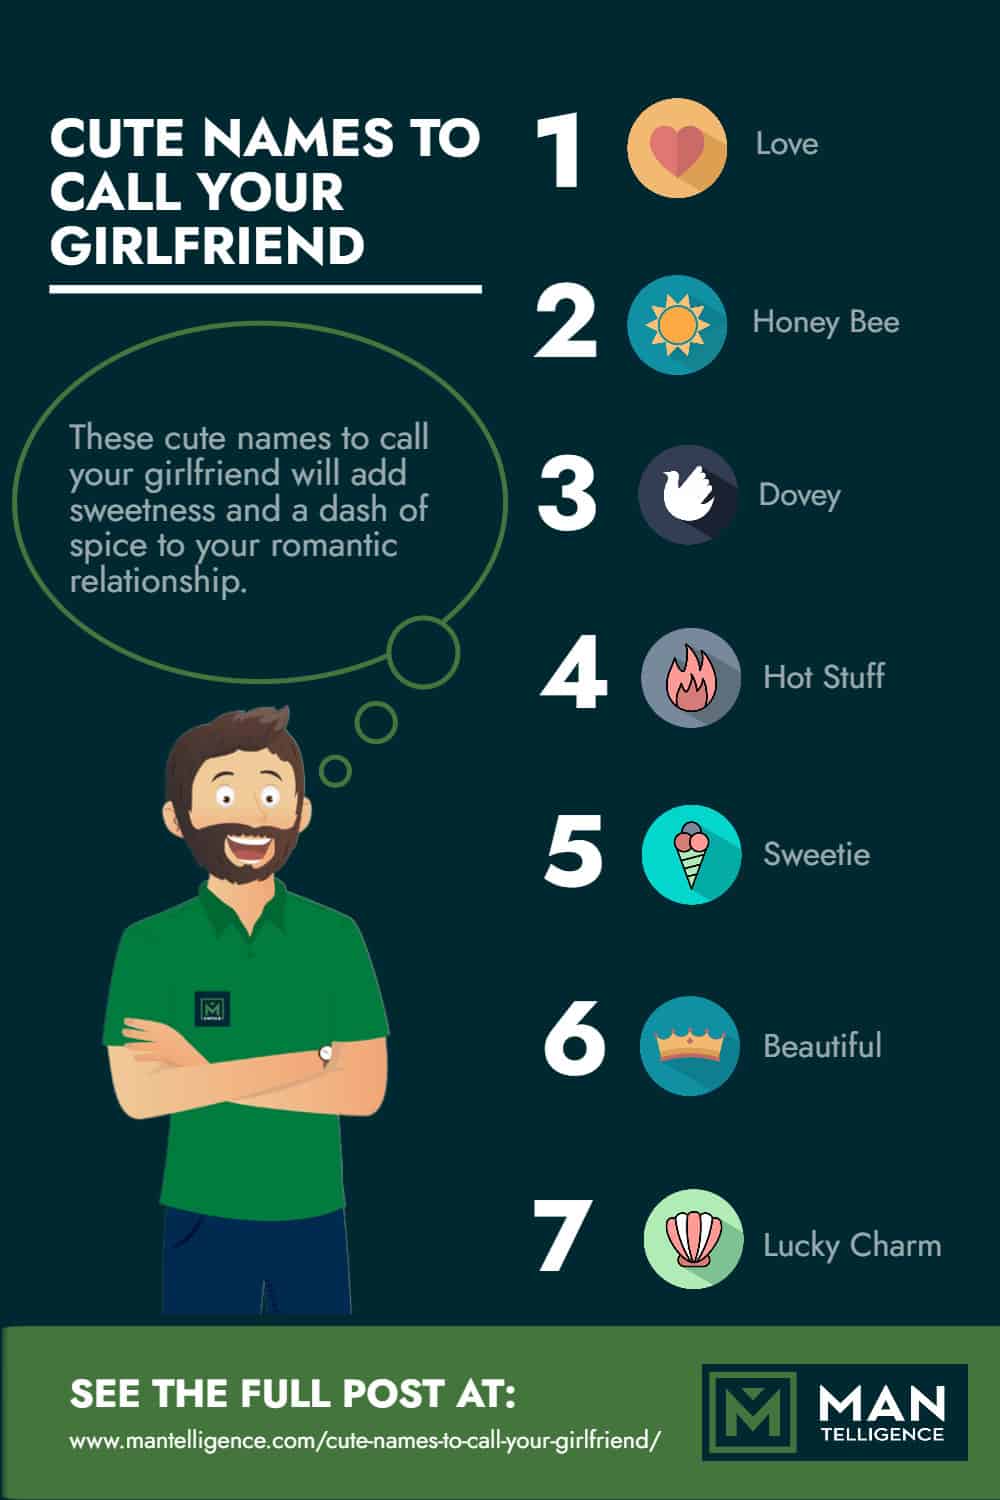 Cute Names to Call Your Girlfriend - Infographic